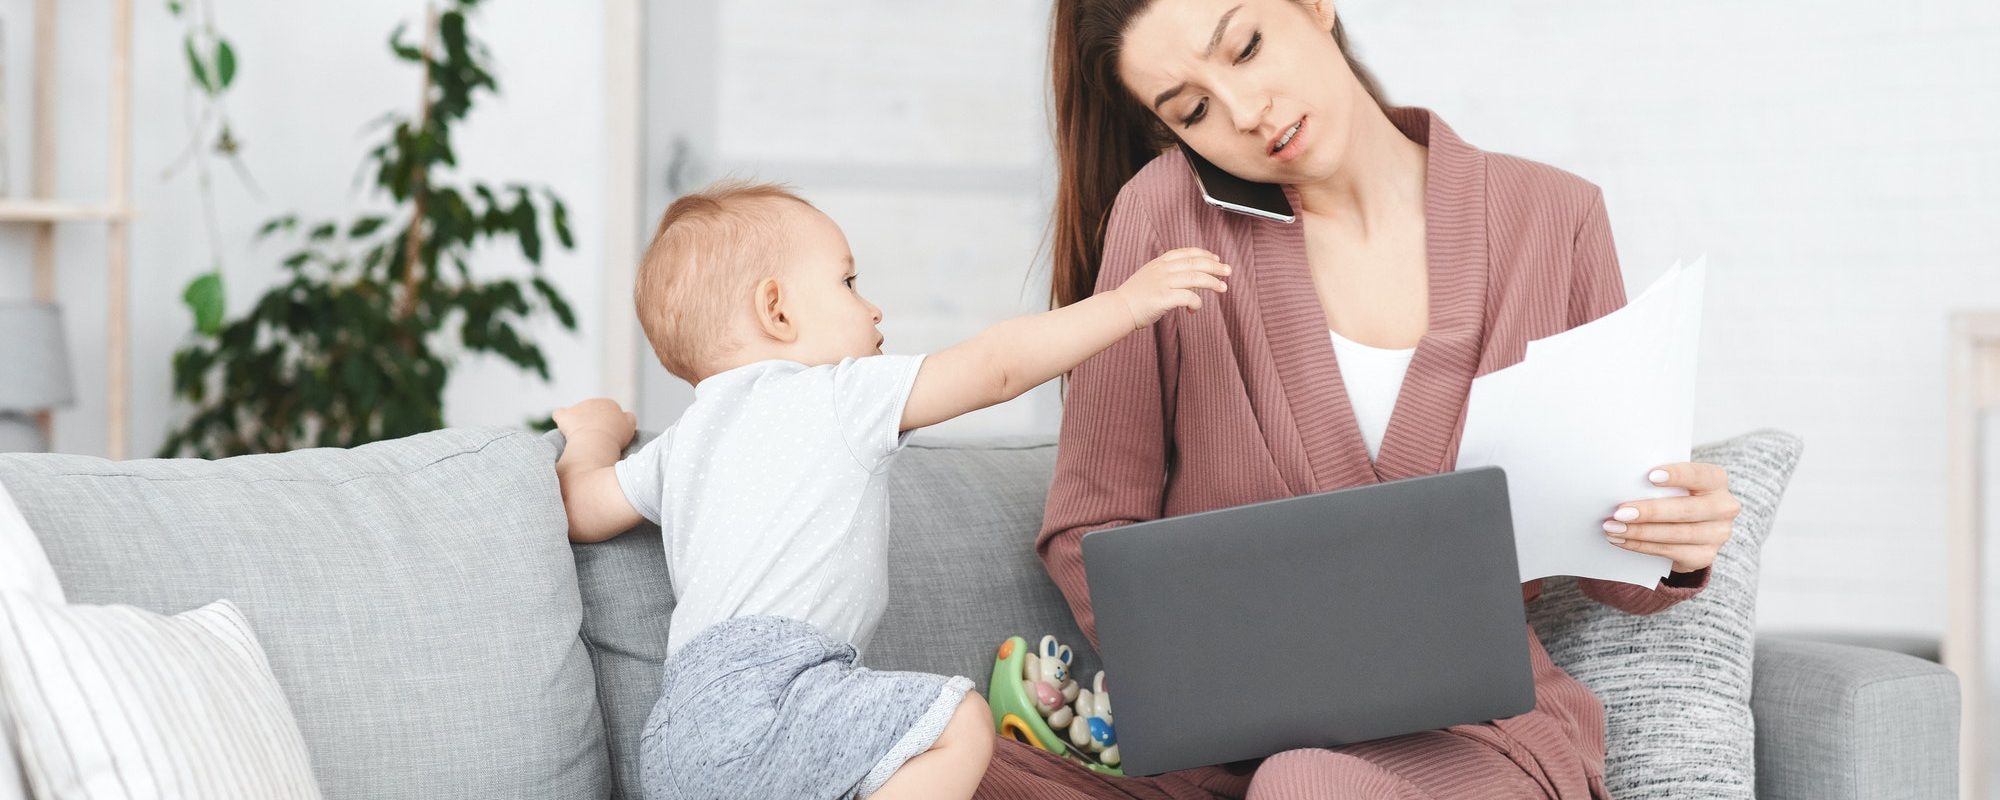 Business And Maternity. Annoyed mom trying to work while toddler distracting her